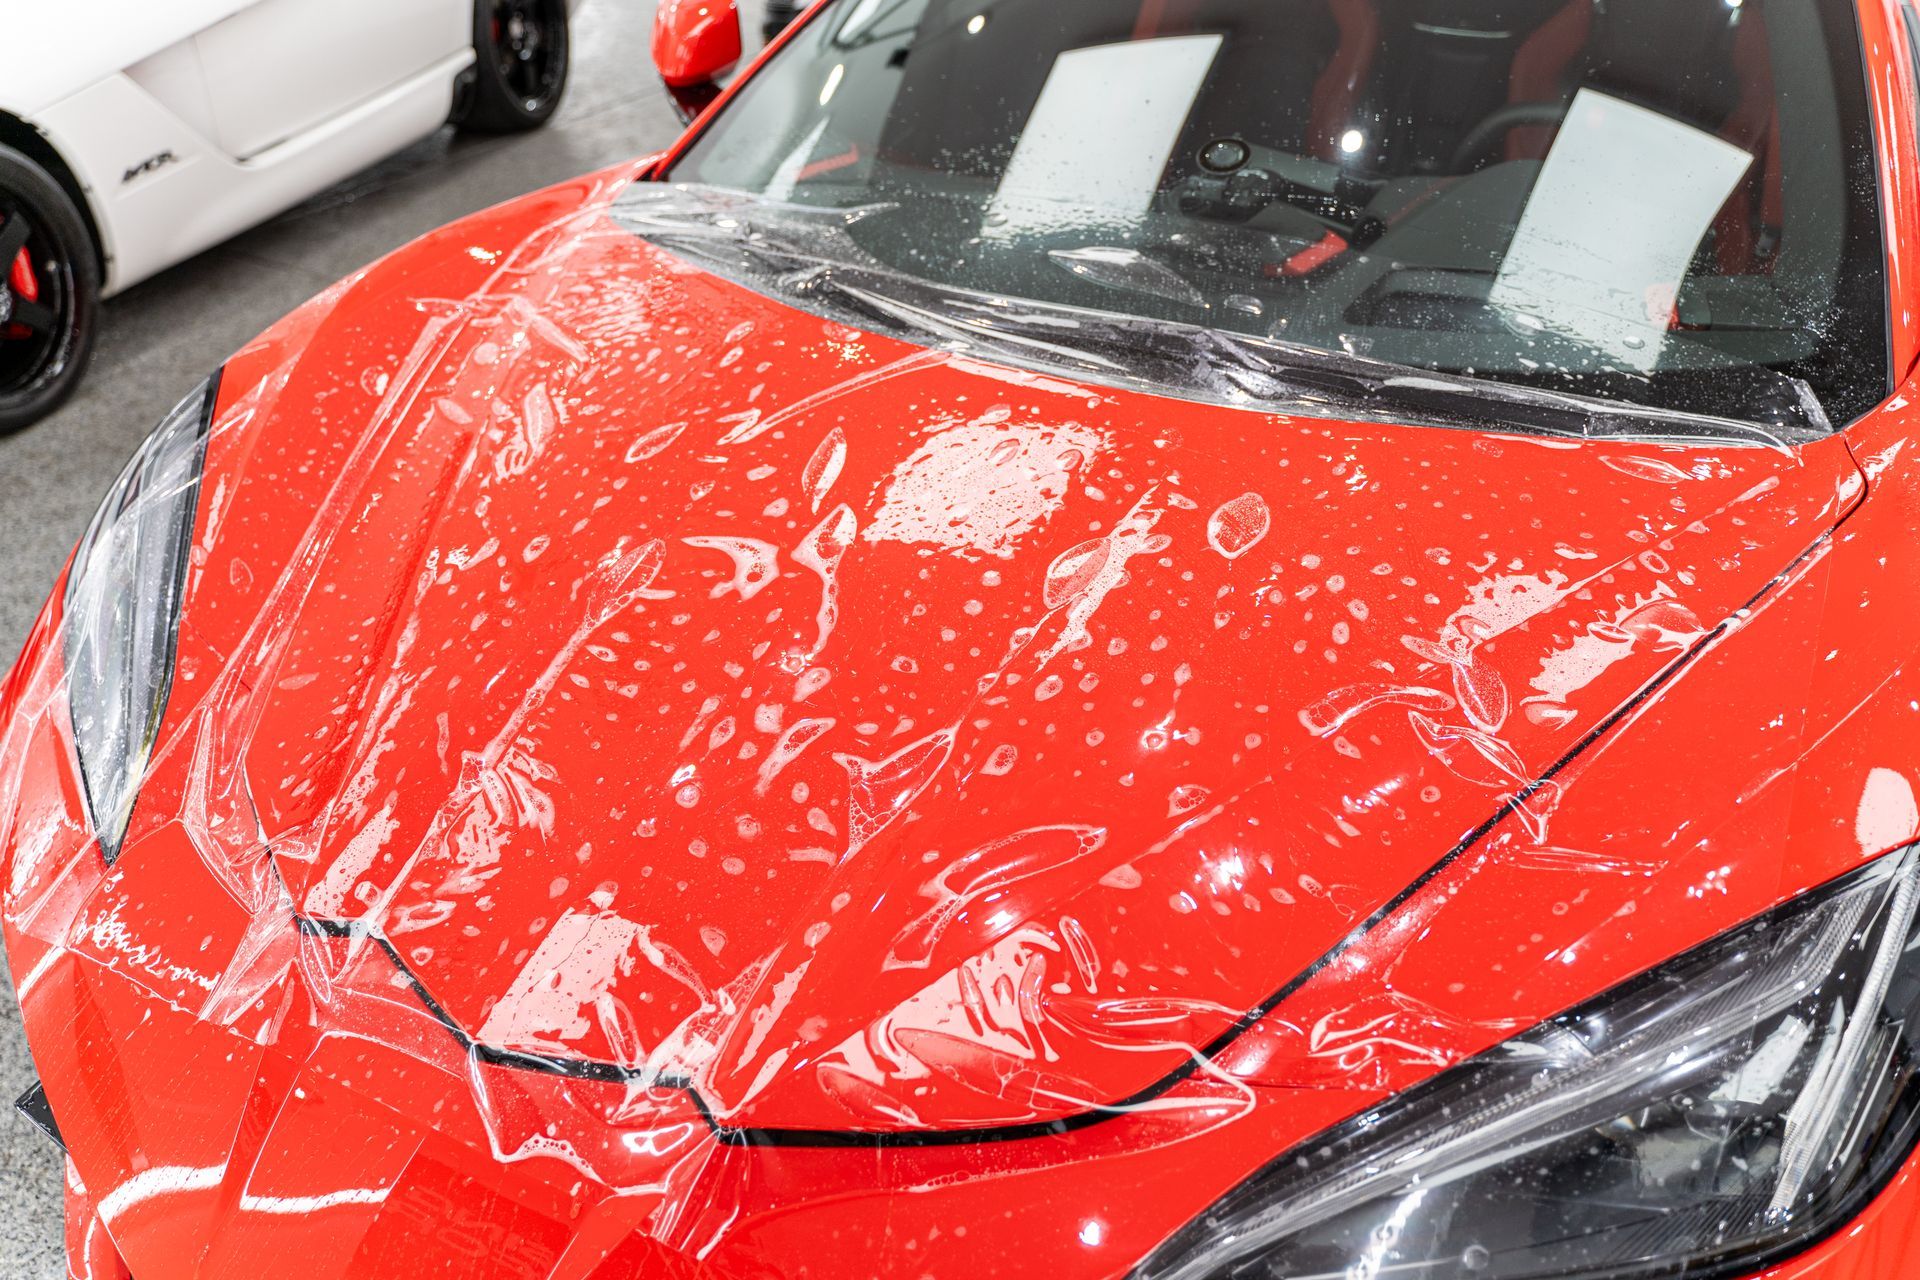 The hood of a red sports car is wrapped in plastic.